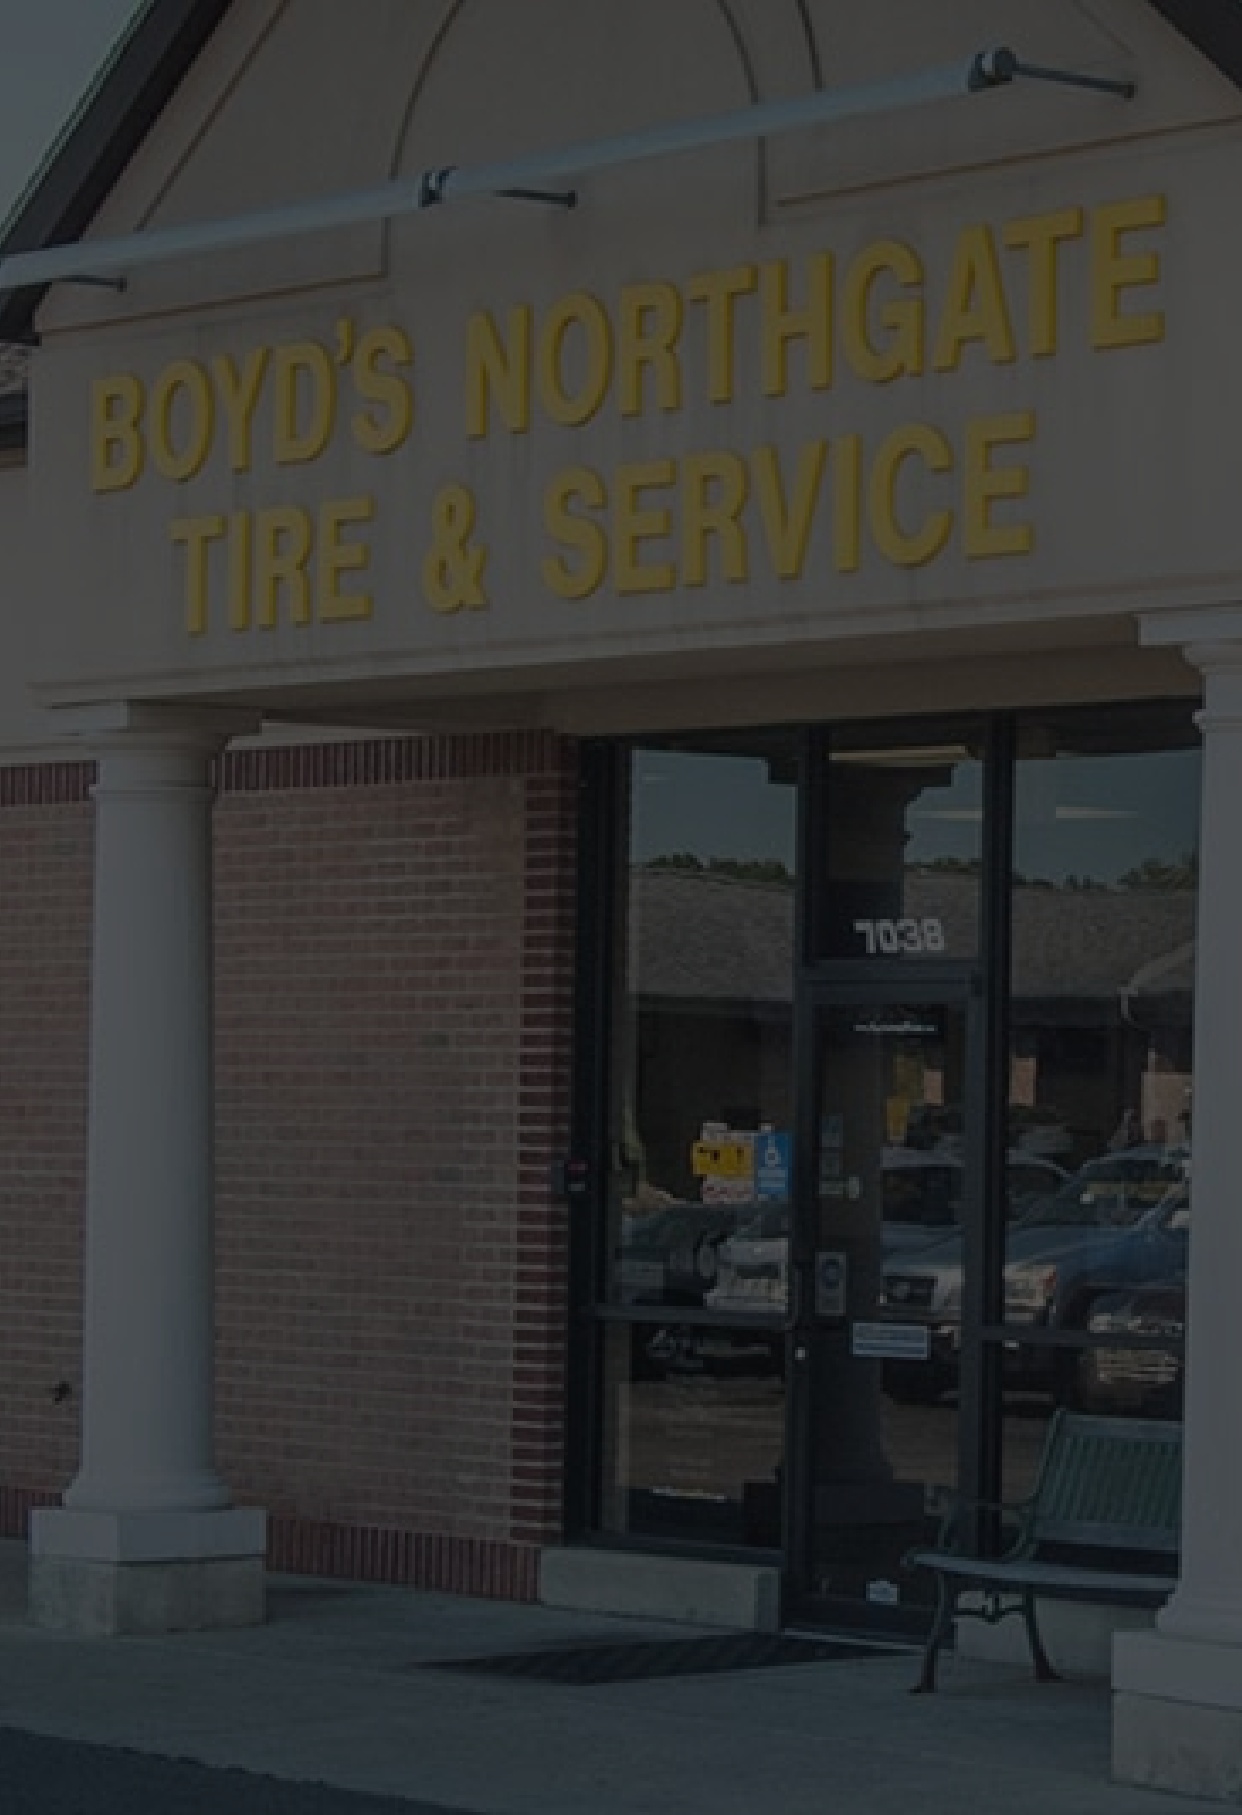 Boyd's Tire and Service